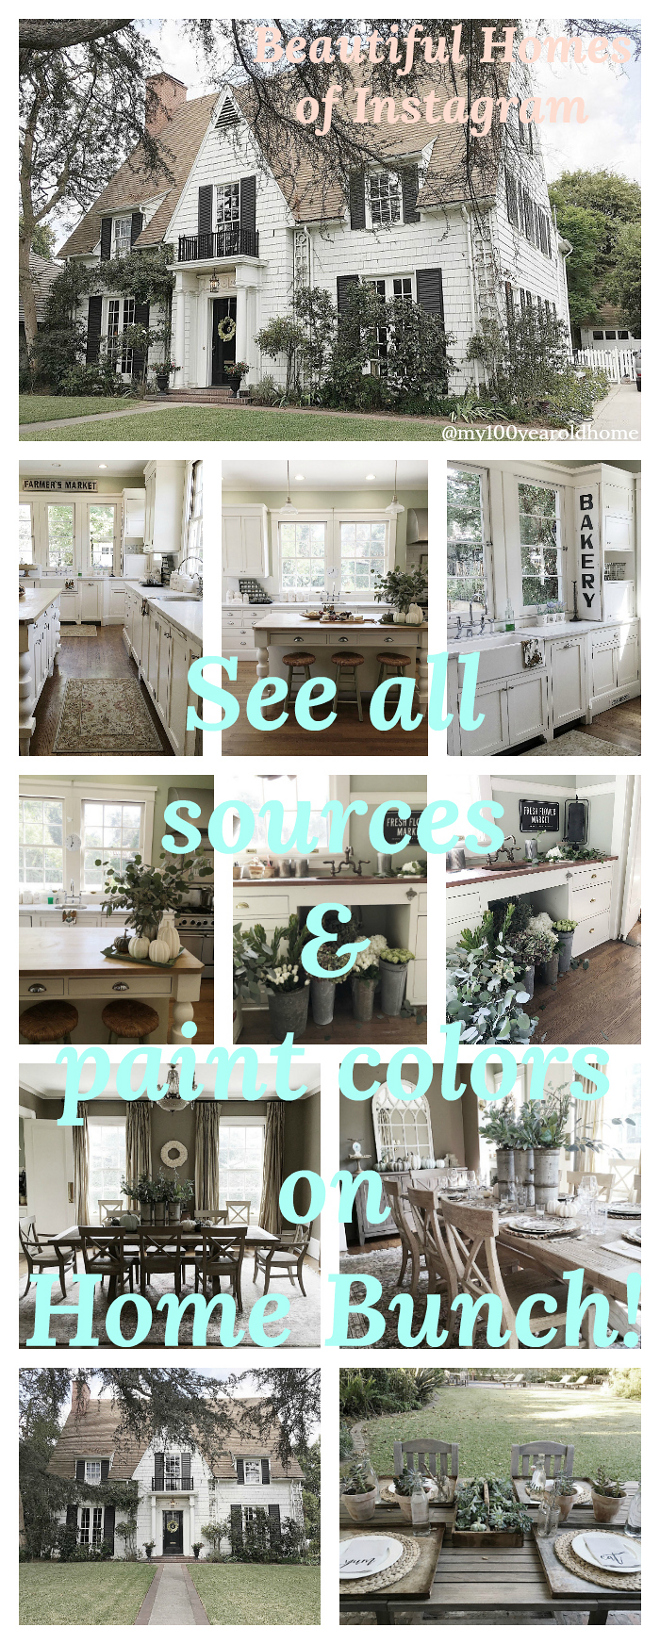 Beautiful Homes of Instagram. A real blog series showcasing real homes. See all sources and paint colors on Home Bunch.